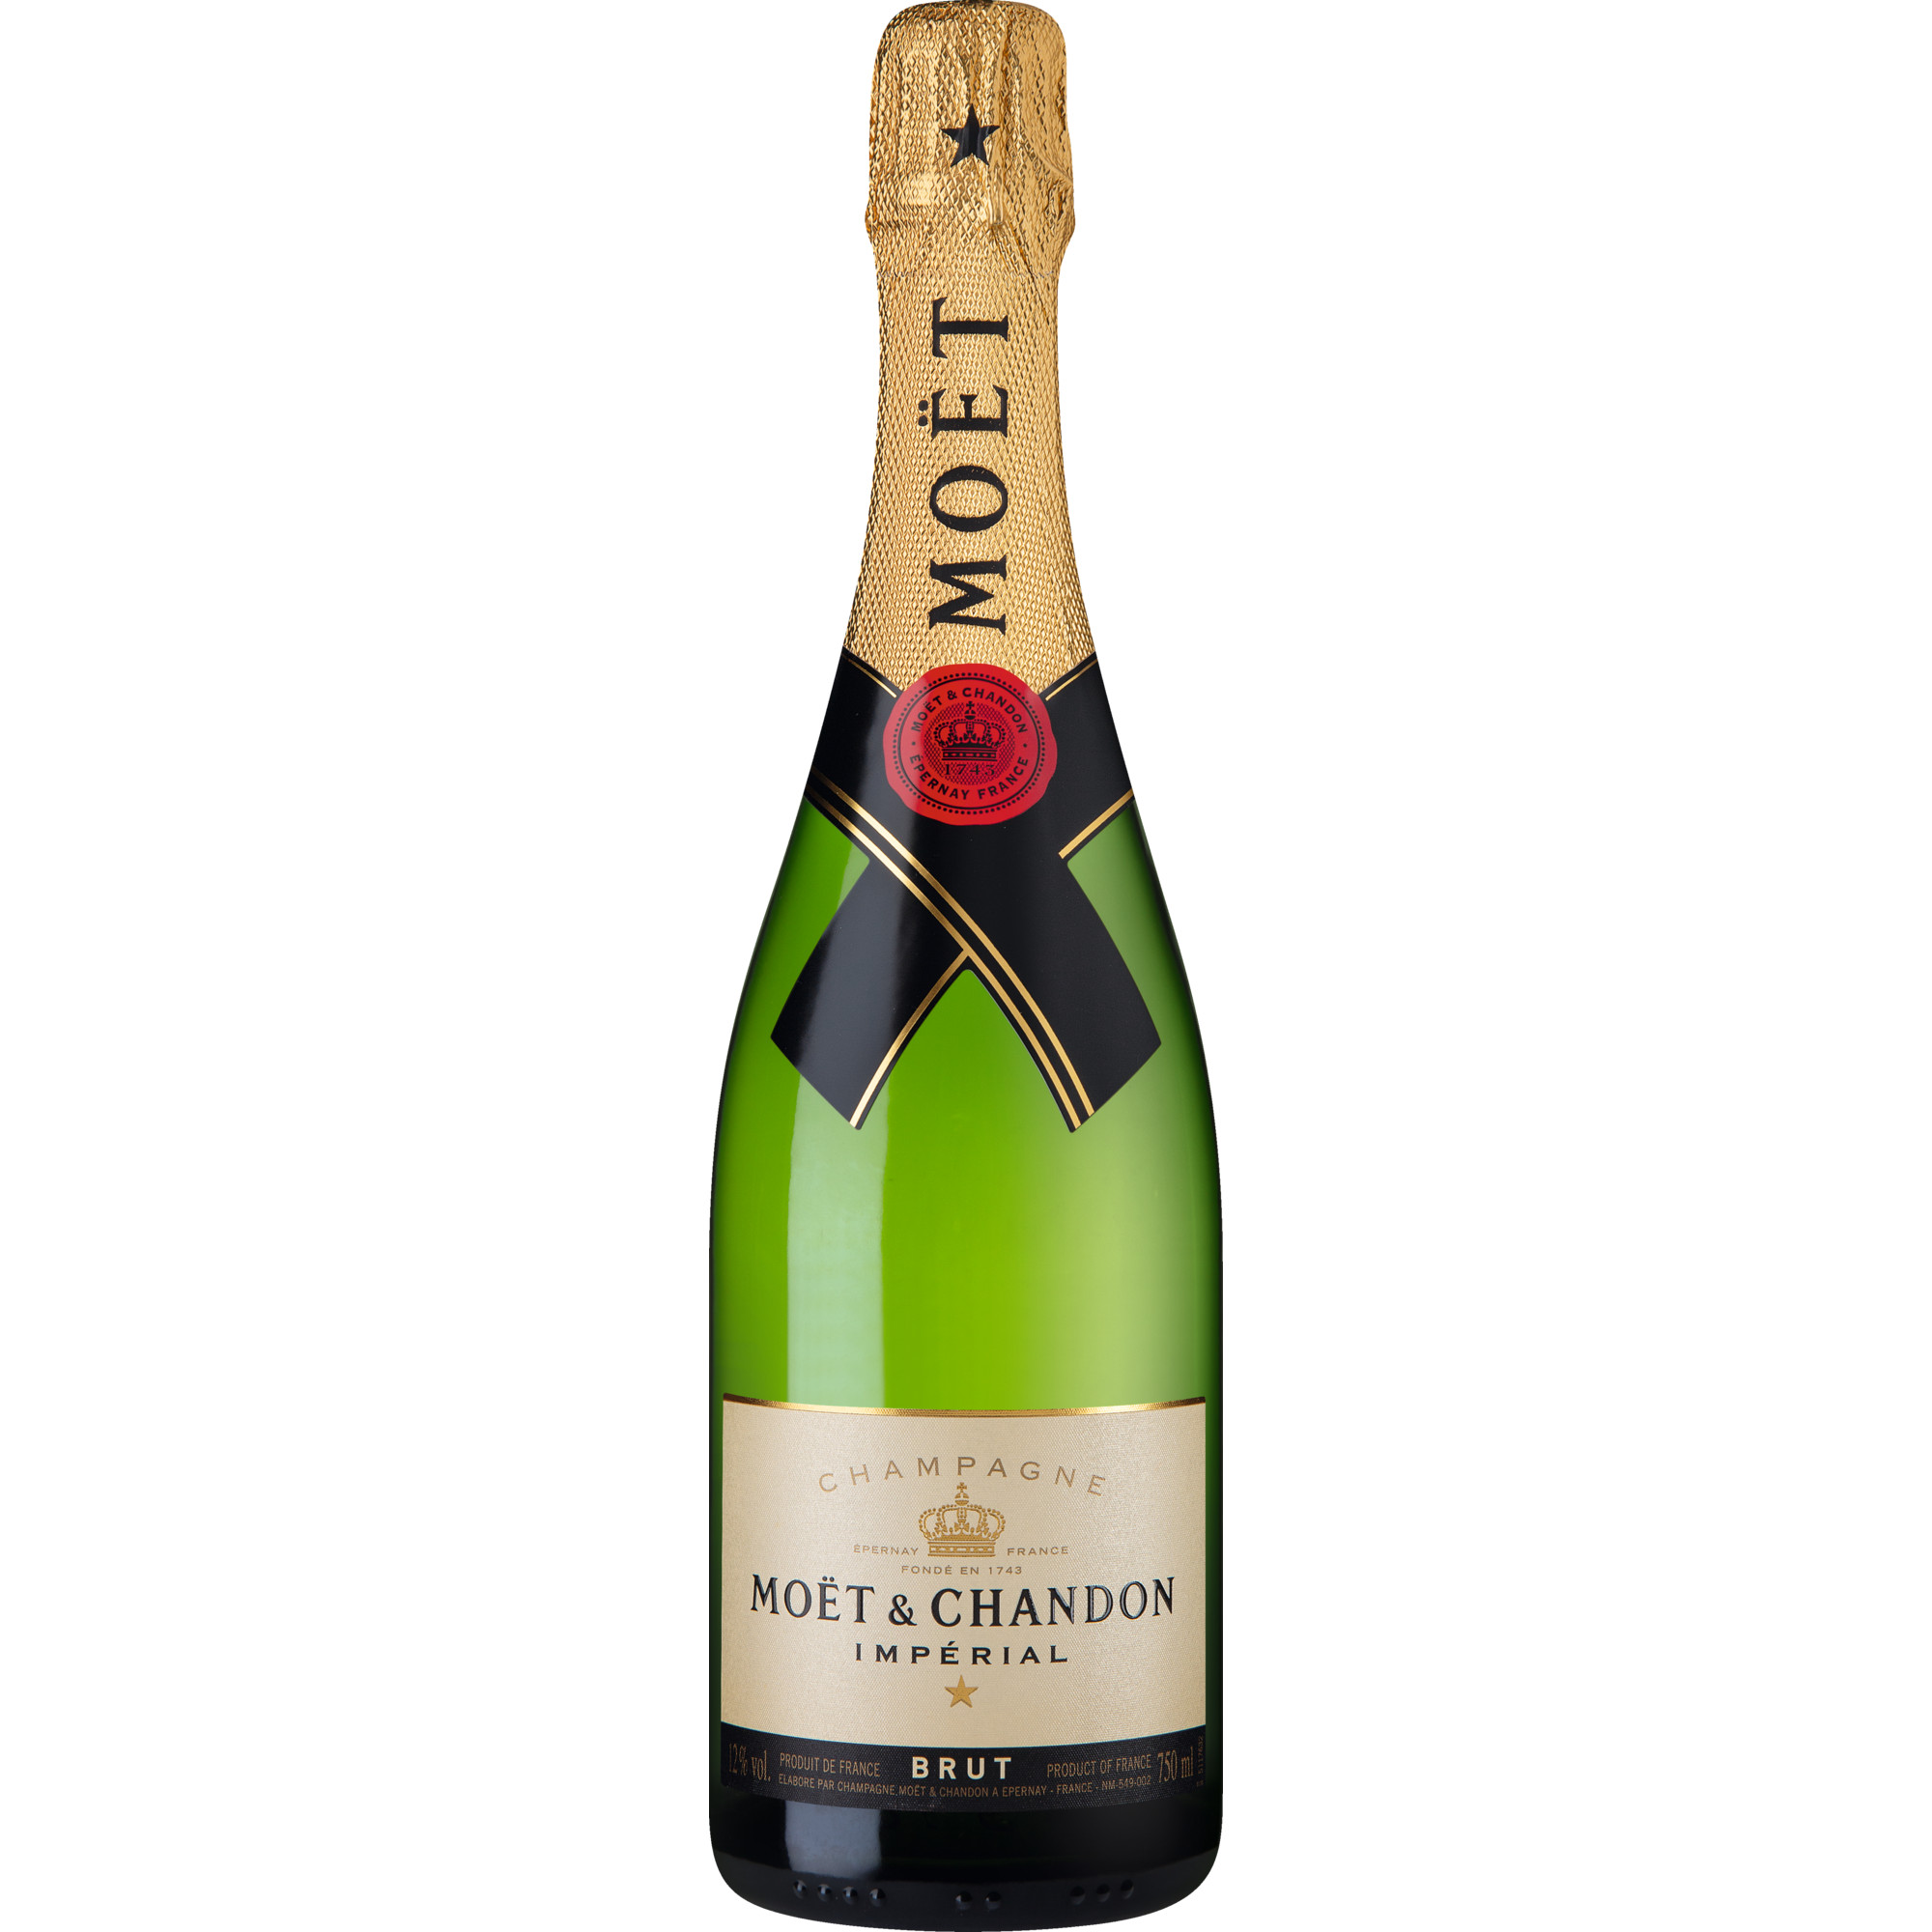 Champagne Moet & Chandon Imperial Ice Jacket, Brut, Champagne AC, Champagne, Schaumwein  Champagner Hawesko